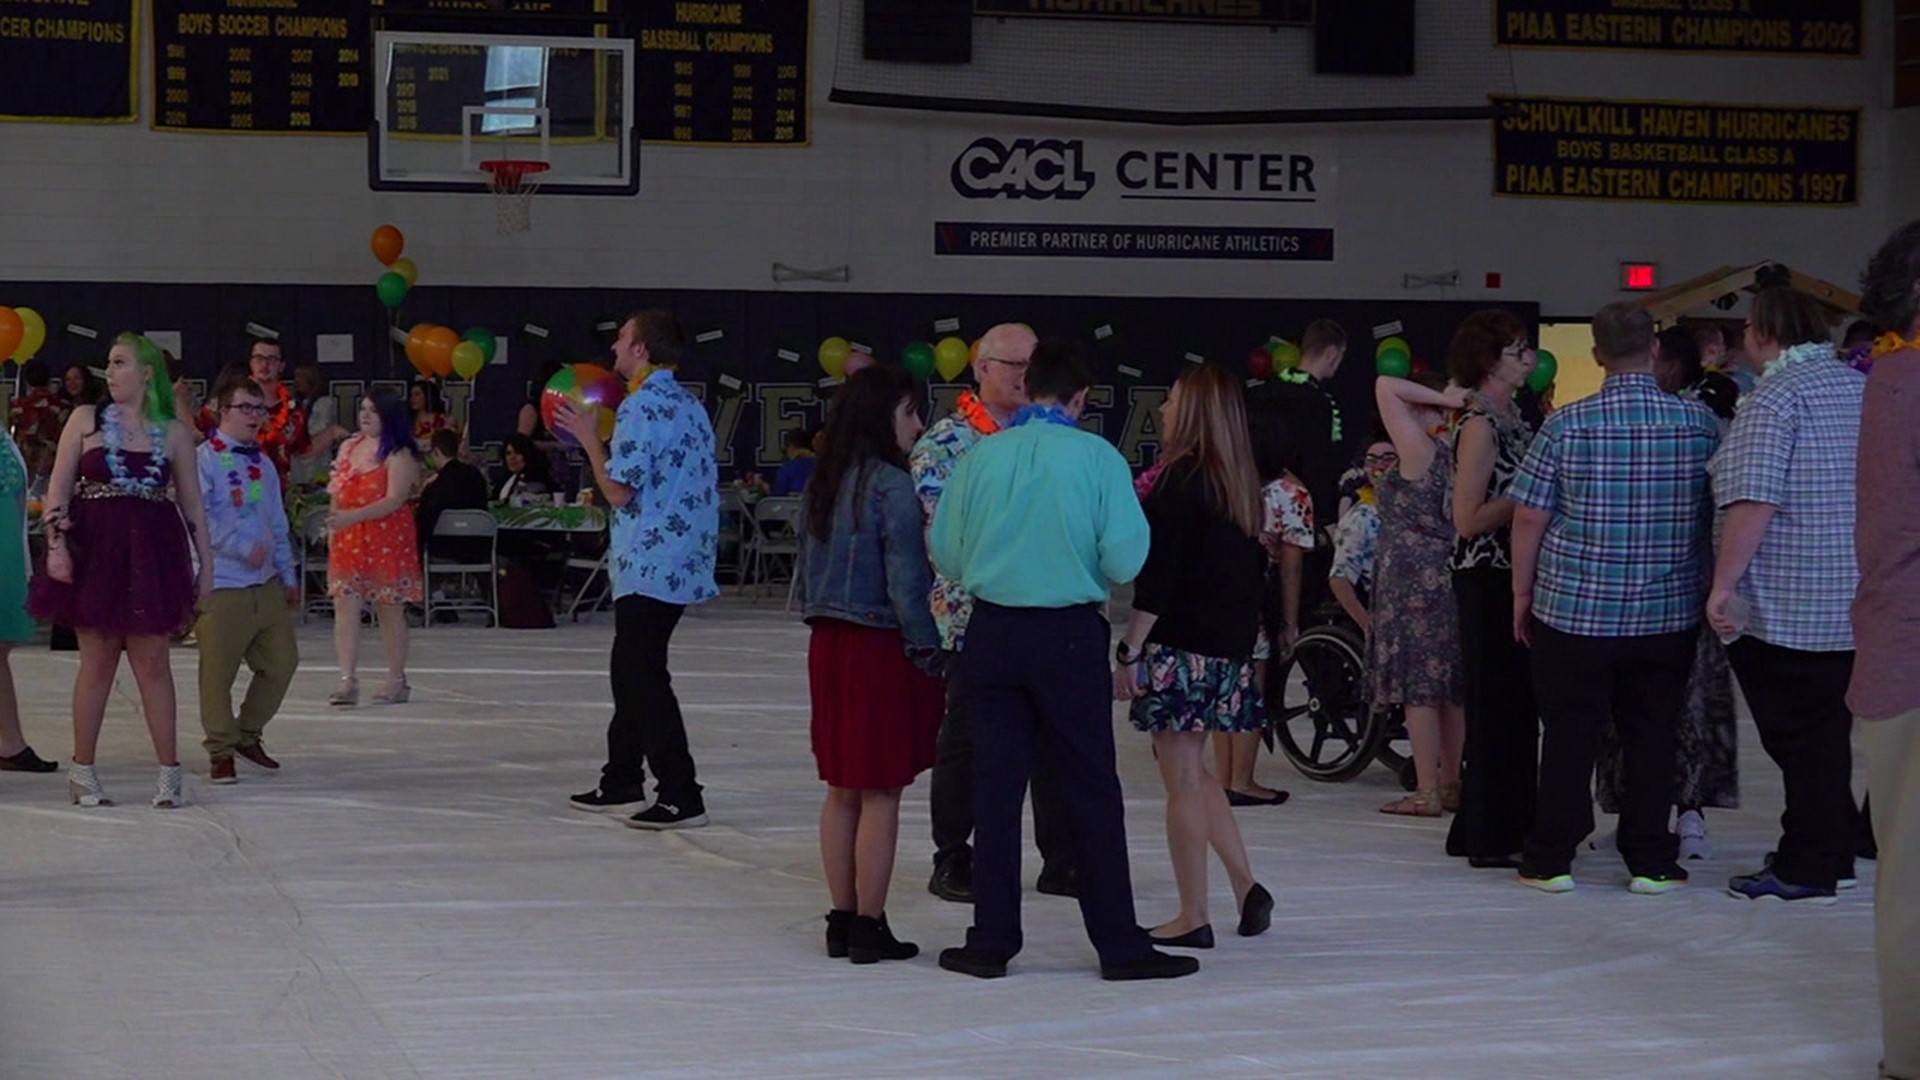 Schuylkill Haven High School kicked off prom season Tuesday hosting a county-wide event for students with disabilities, a highlight for the school year.